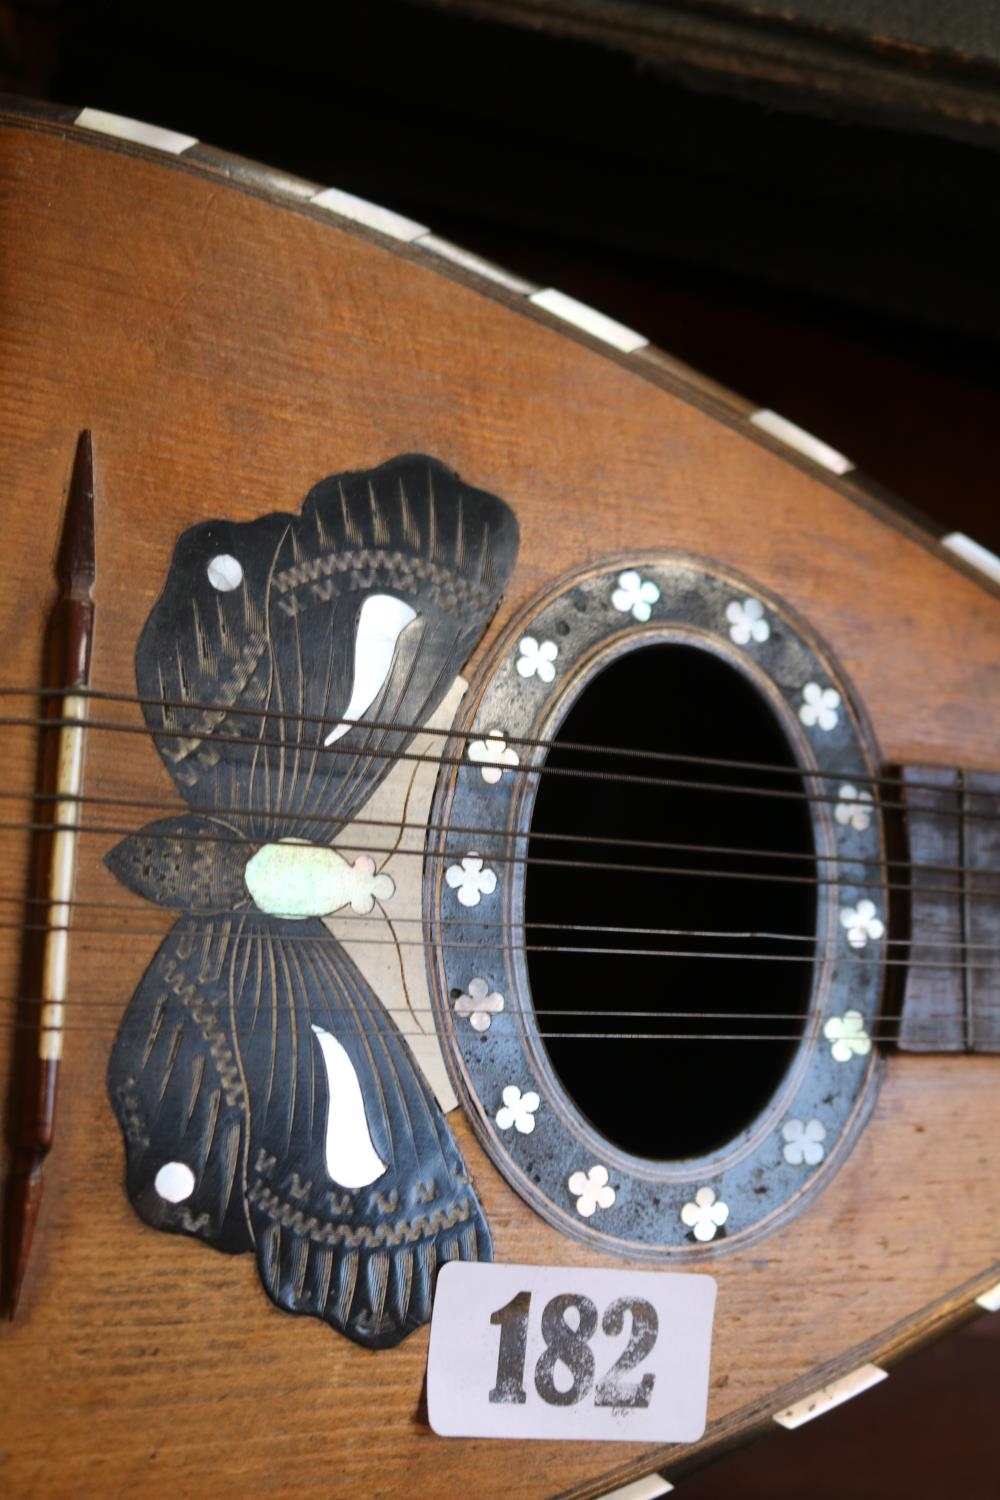 Mario Caselia Catania Mandolin with Butterfly inlaid decoration - Image 3 of 3